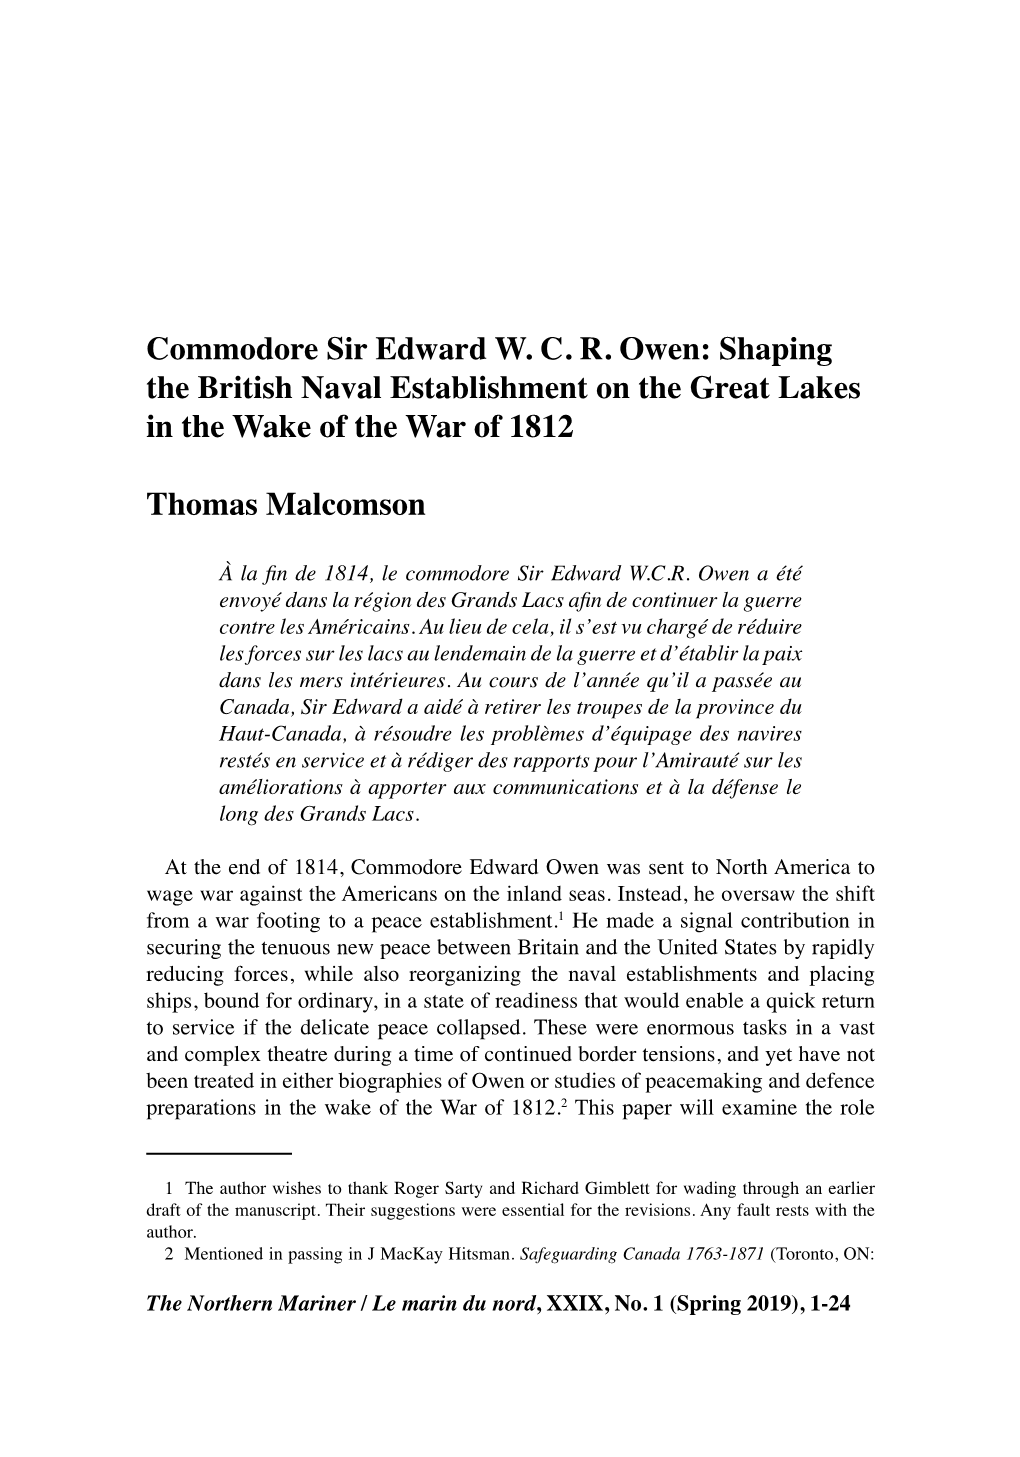 Commodore Sir Edward W. C. R. Owen: Shaping the British Naval Establishment on the Great Lakes in the Wake of the War of 1812